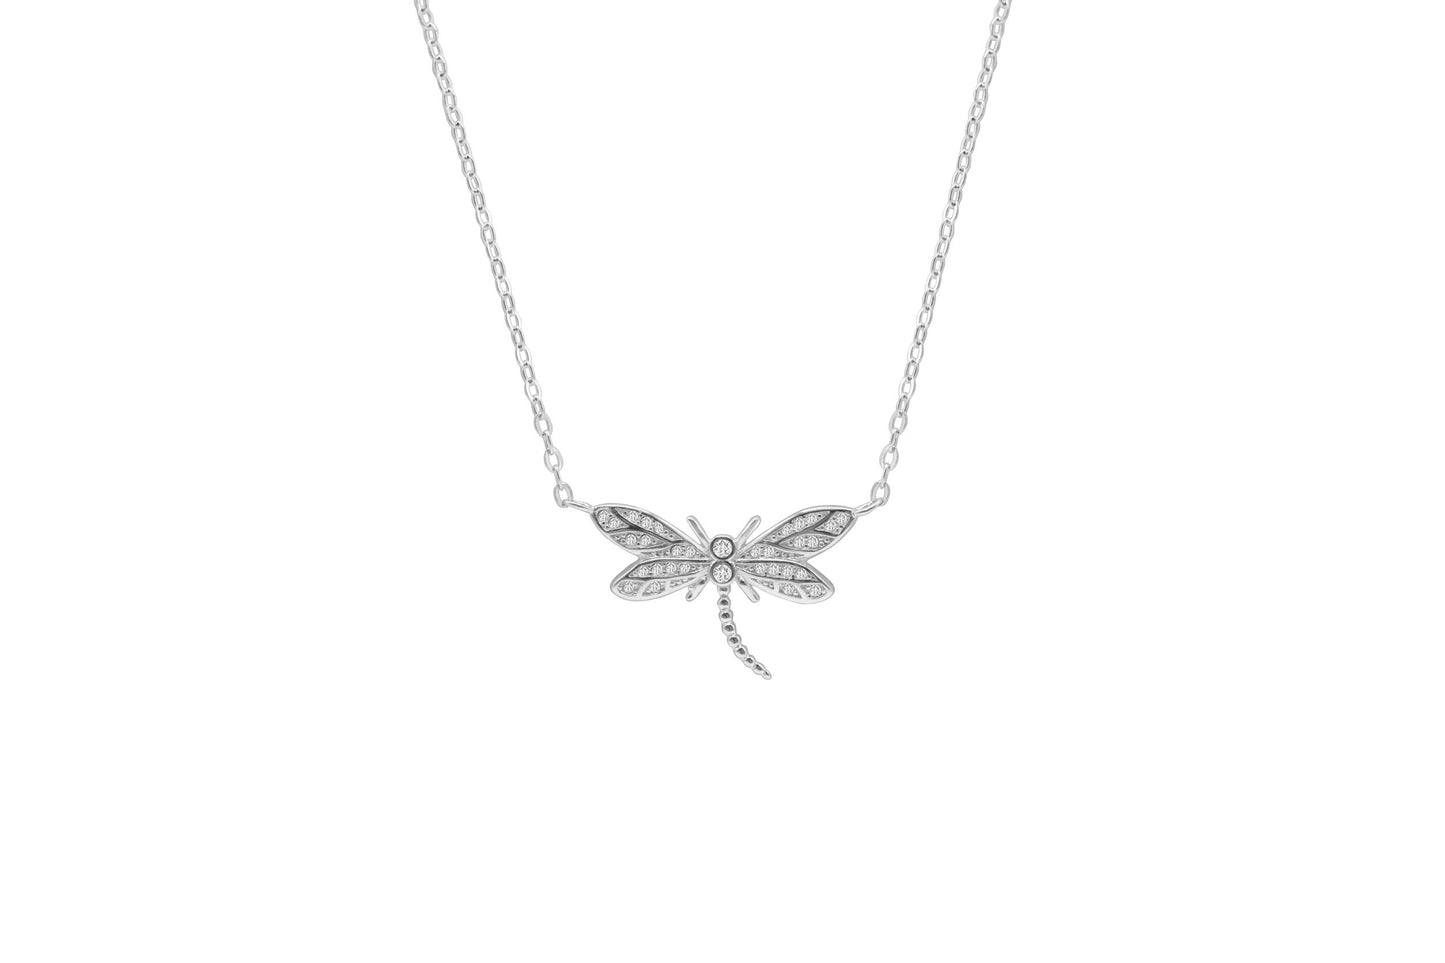 Charm & Chain Necklace - Dragonfly